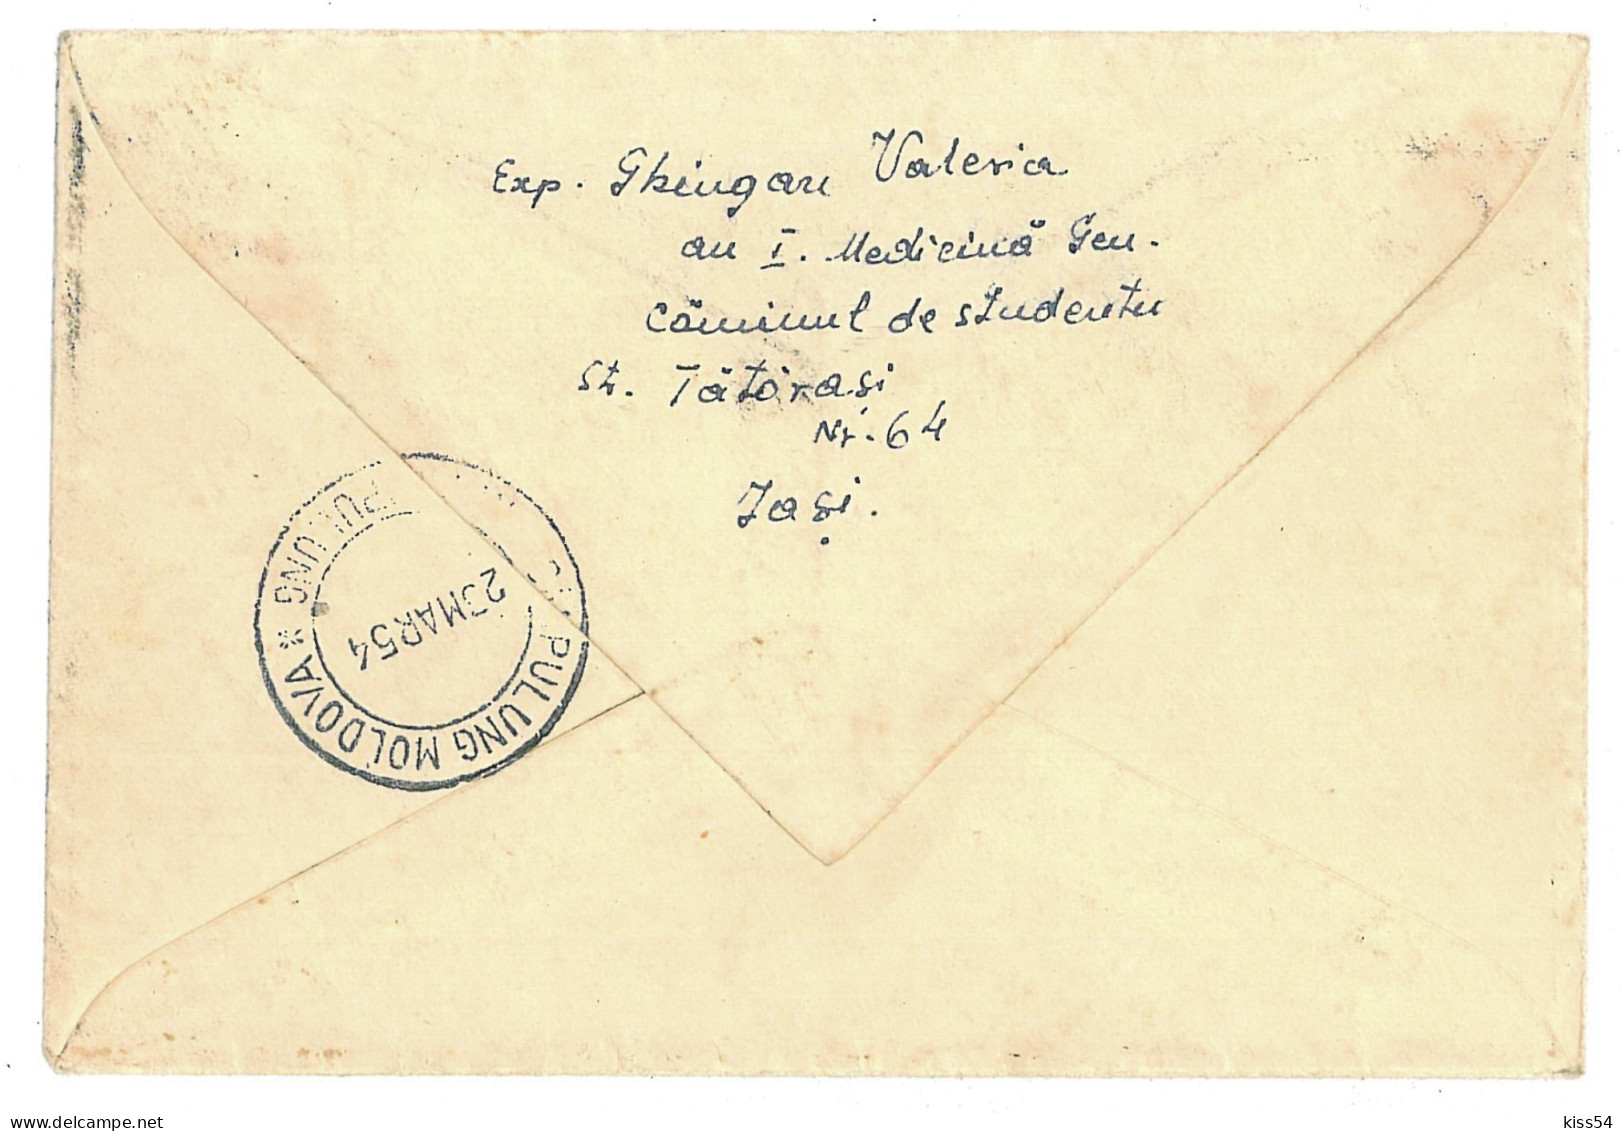 CIP 11 - 114-a IASI - Cover - Used - 1956 - Lettres & Documents